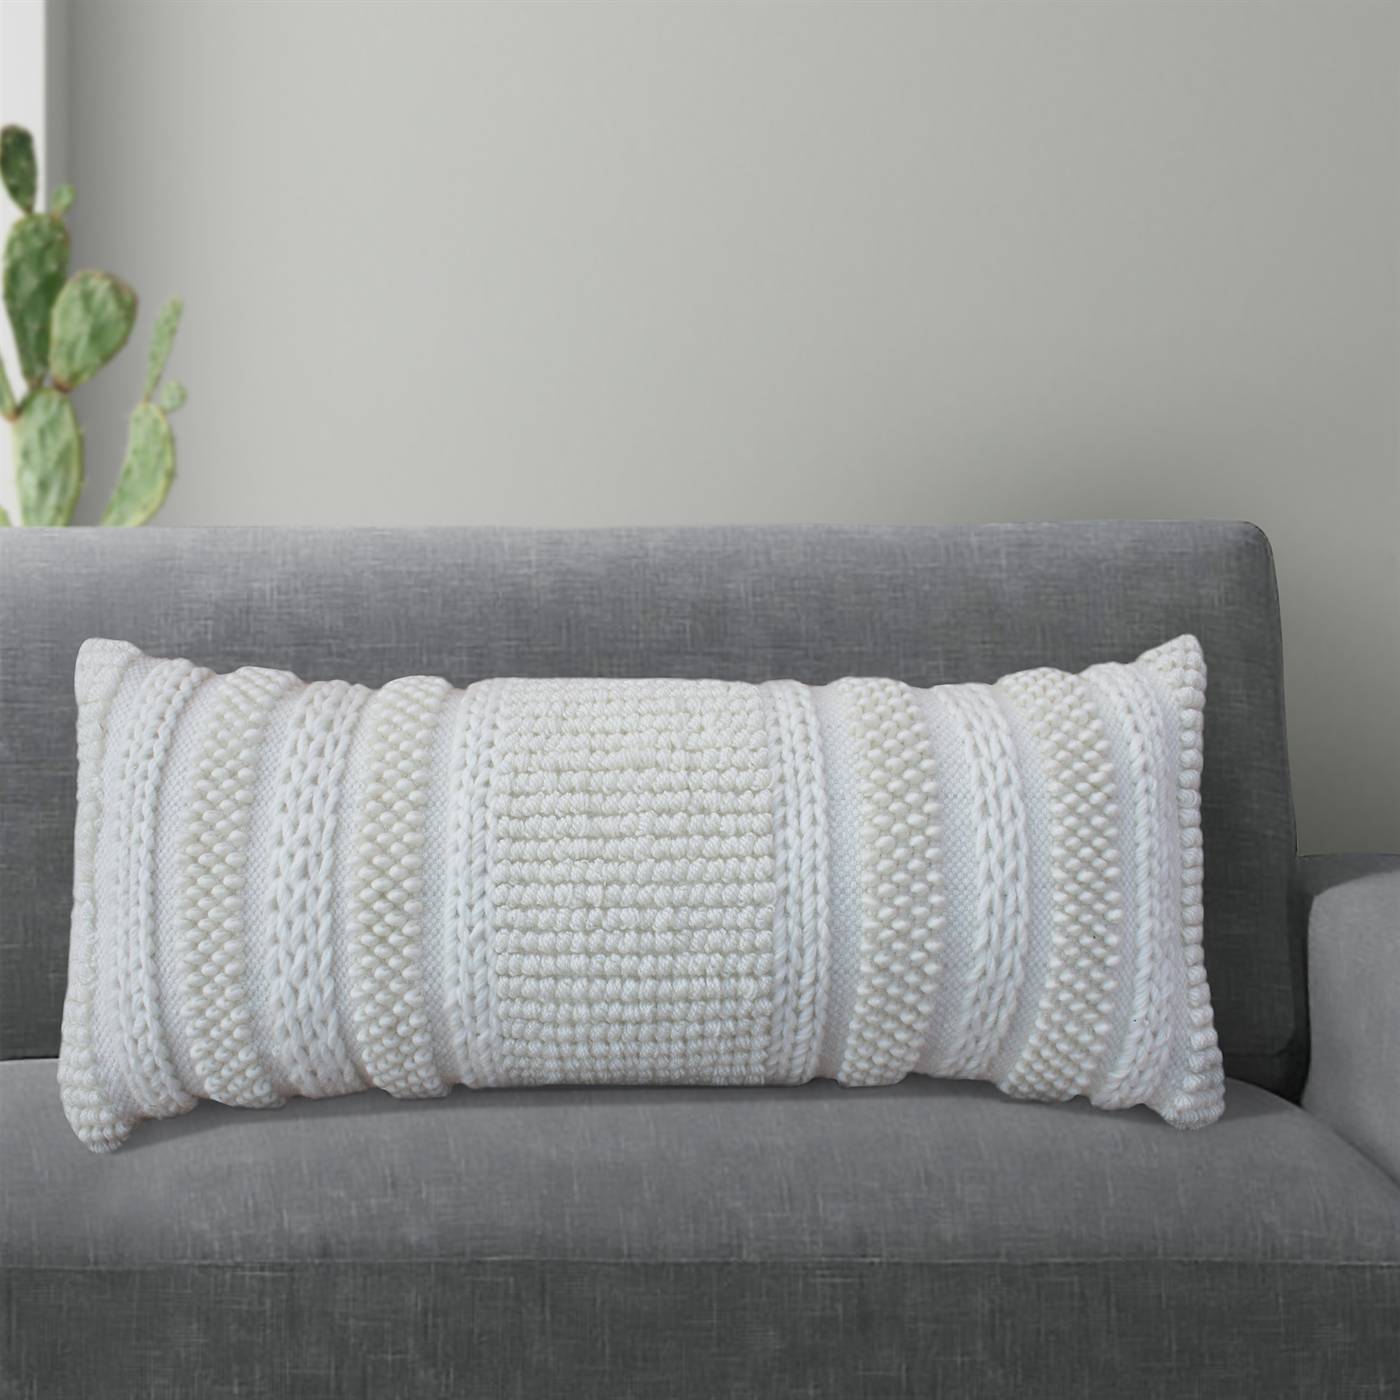 Quindio Lumber Cushion, 36x91 cm, Natural White, NZ Wool, PET, Hand Woven, Pitloom, All Loop